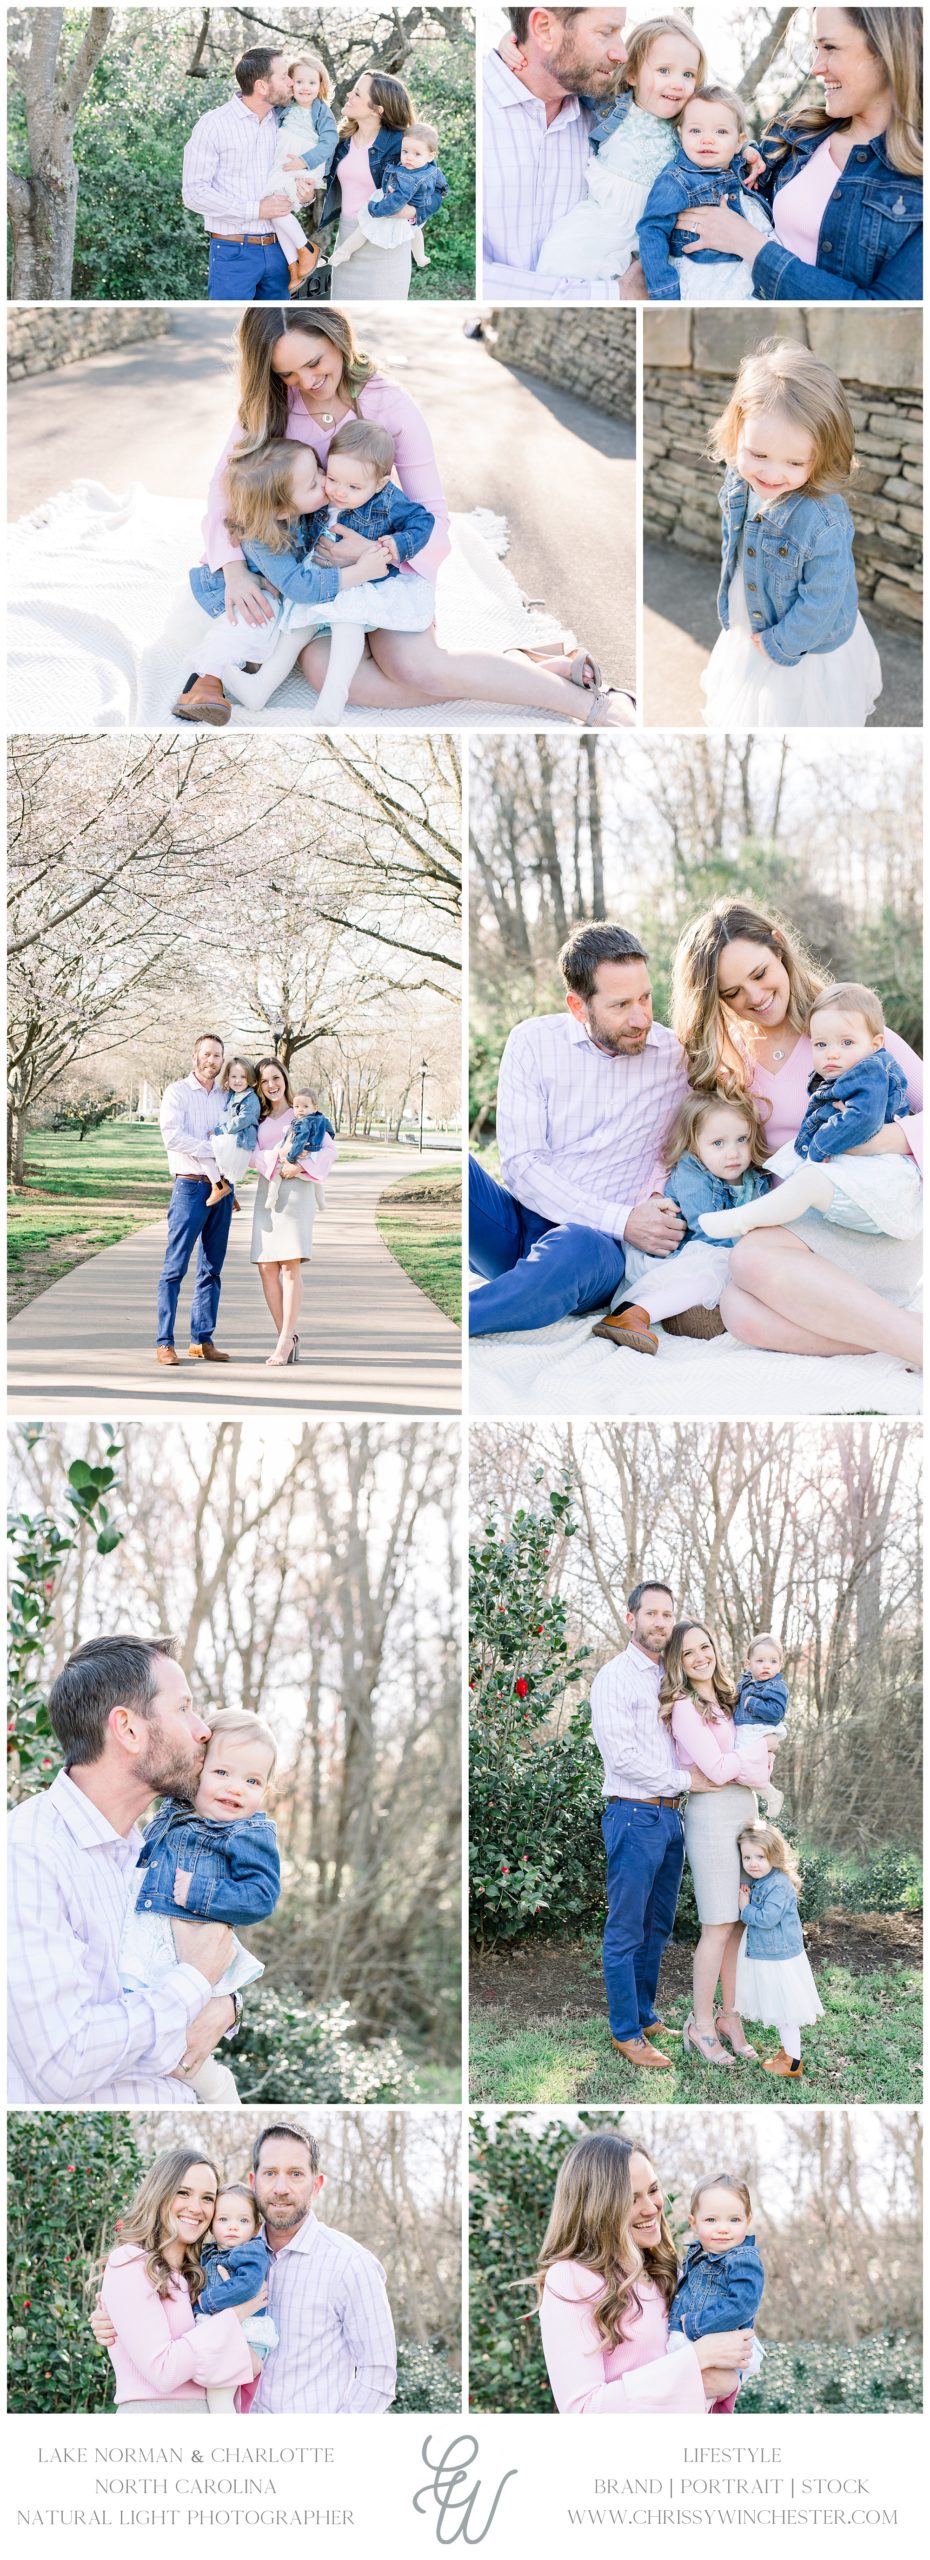 Chrissy Winchester Photography,Freedom Park NC Family Photo Session,